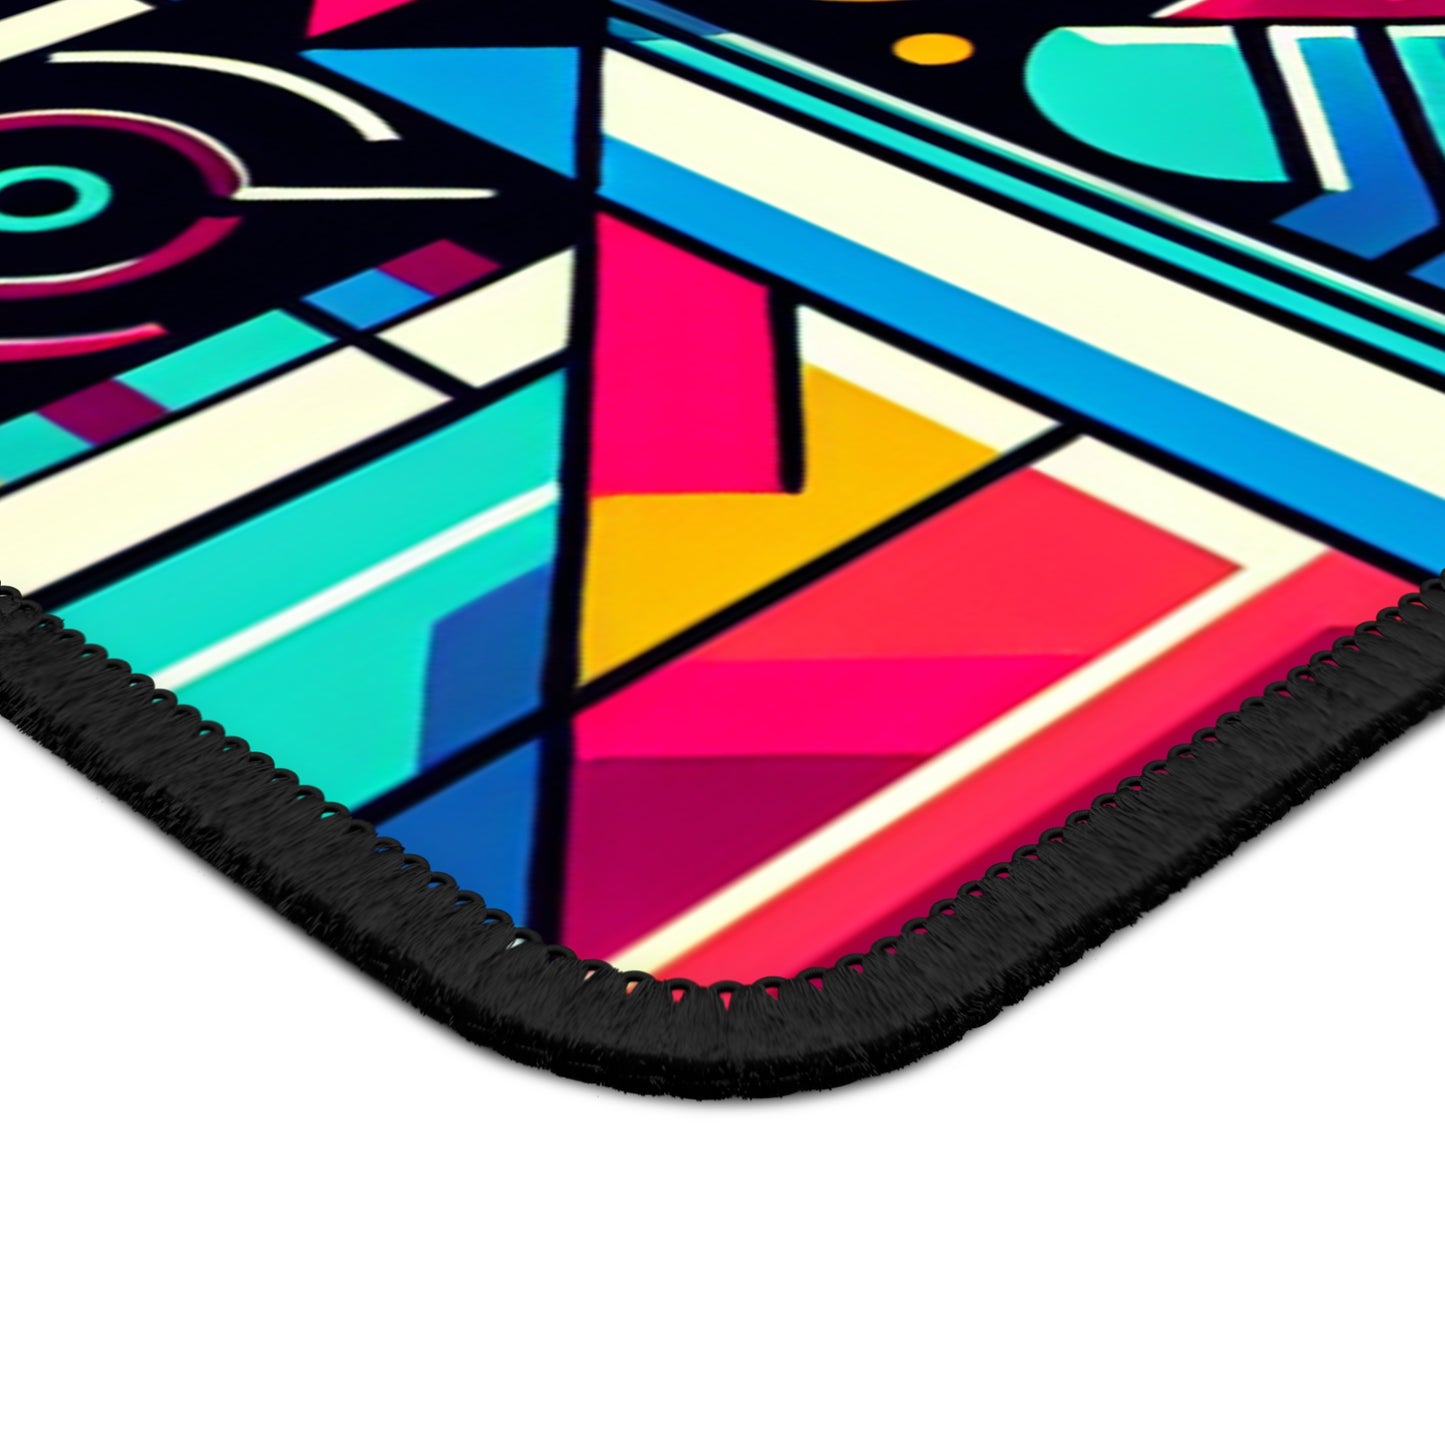 "Neon Geometric Pop" - The Alien Gaming Mouse Pad Contemporary Art Style